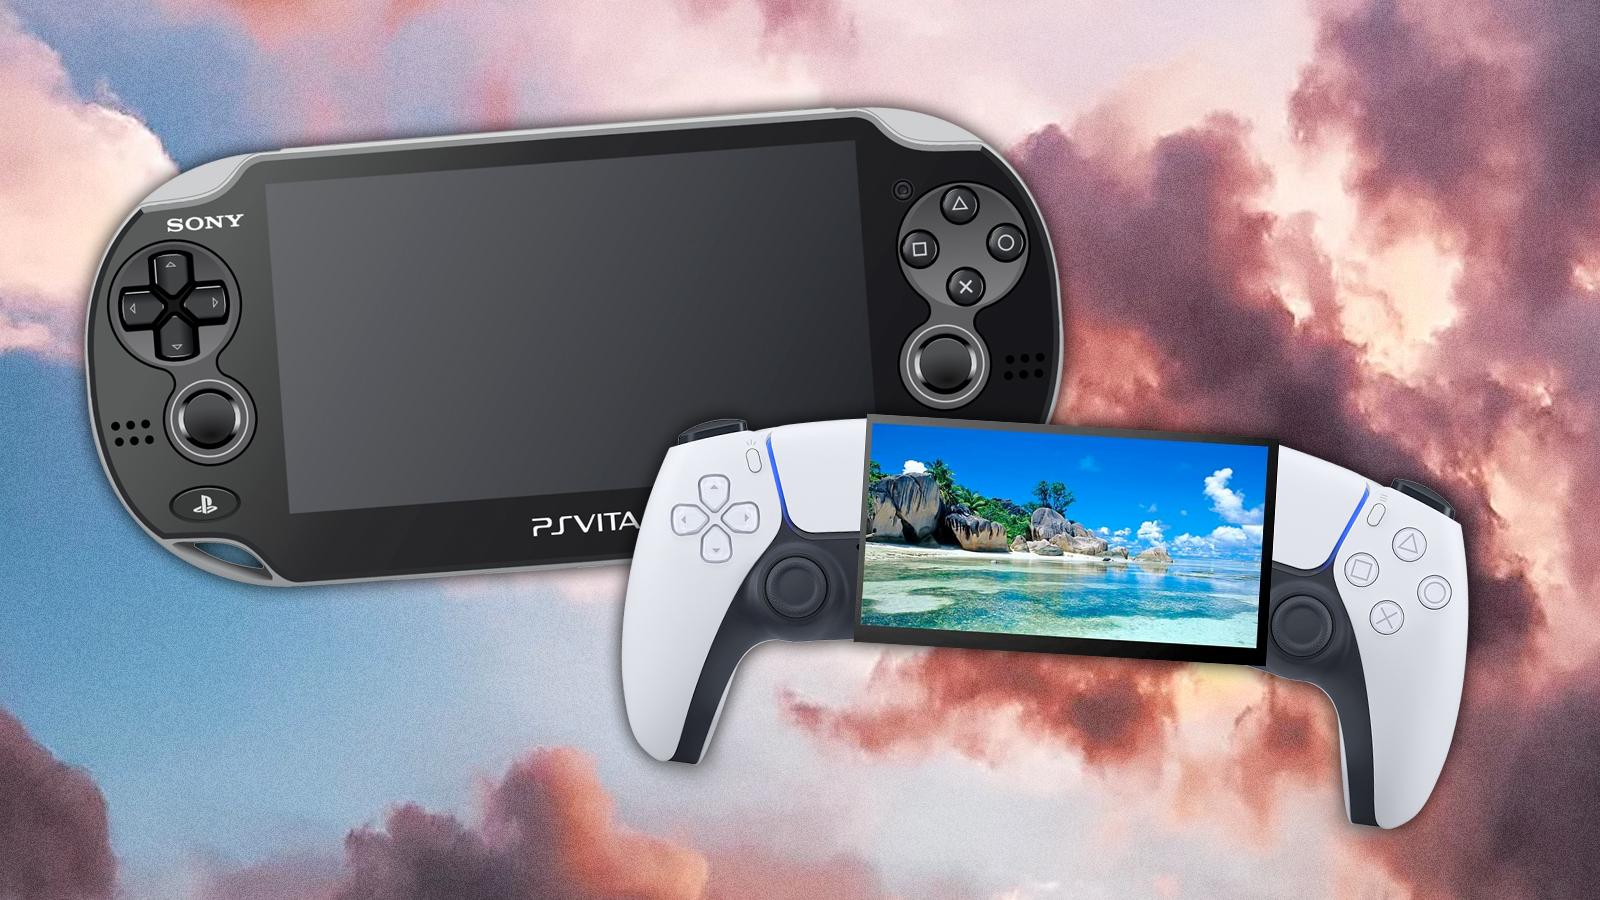 playstation cloud console and a ps vita